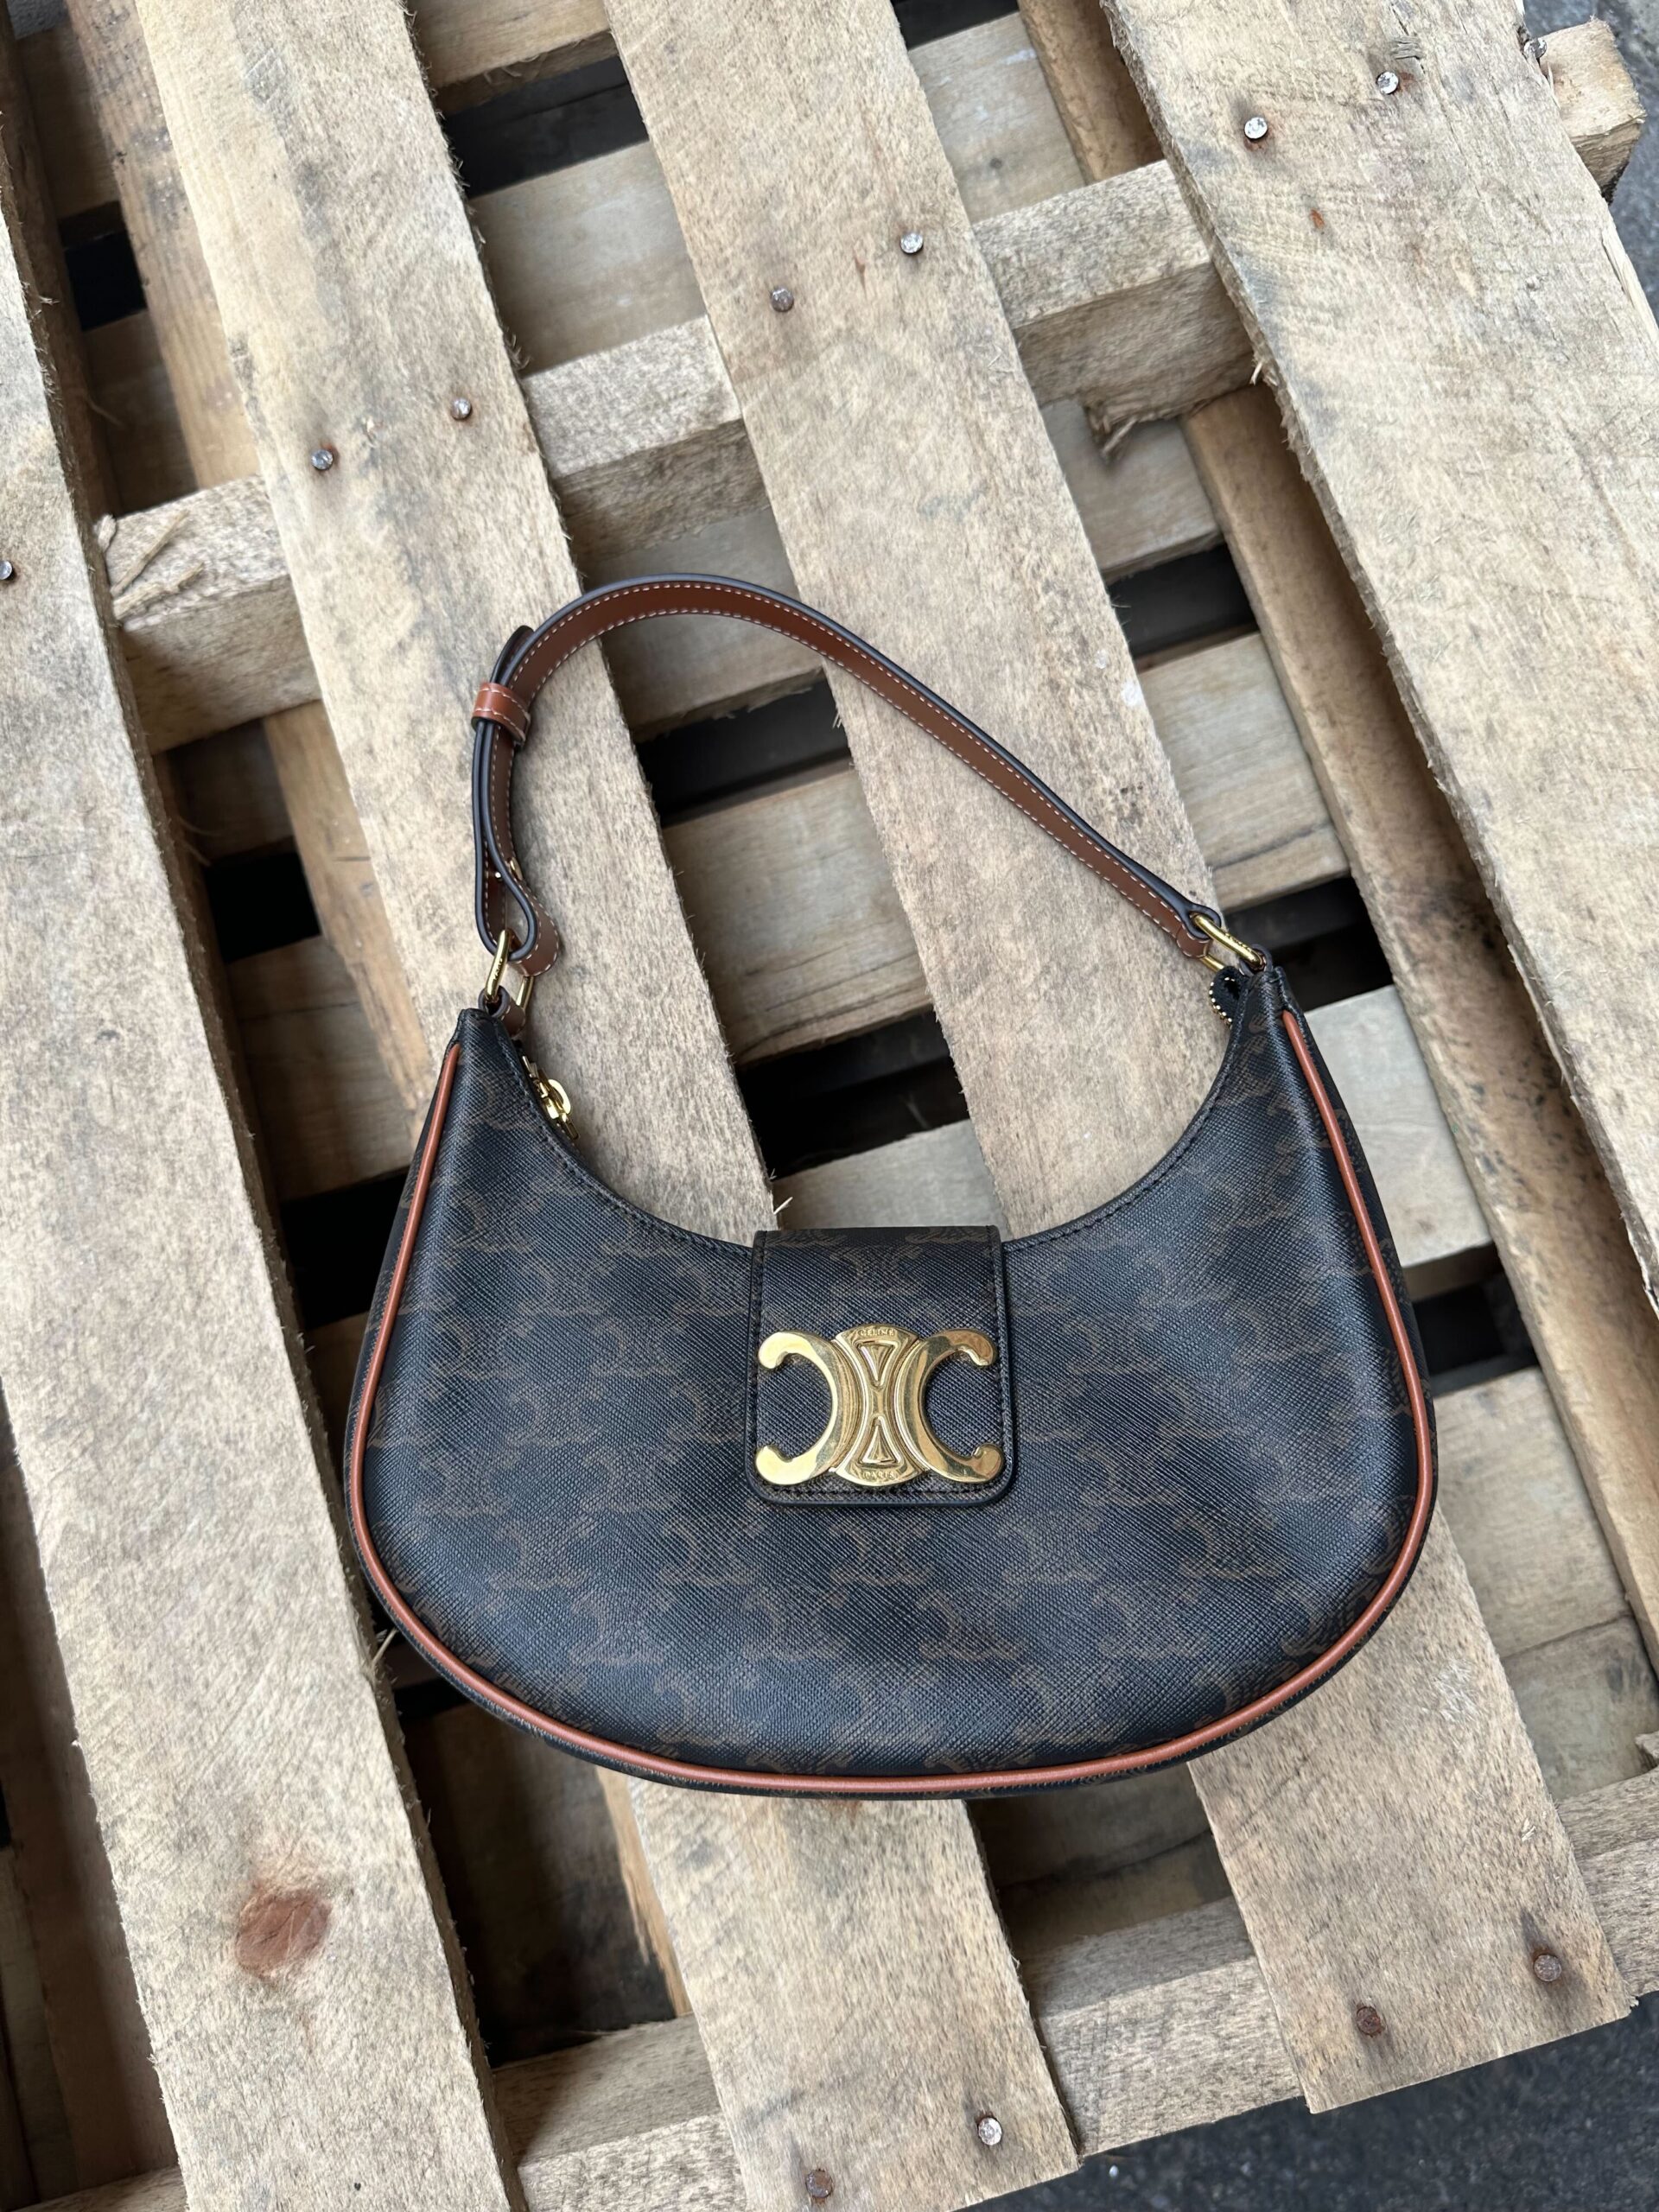 Everything You Need To Know About Celine's New Ava Bag